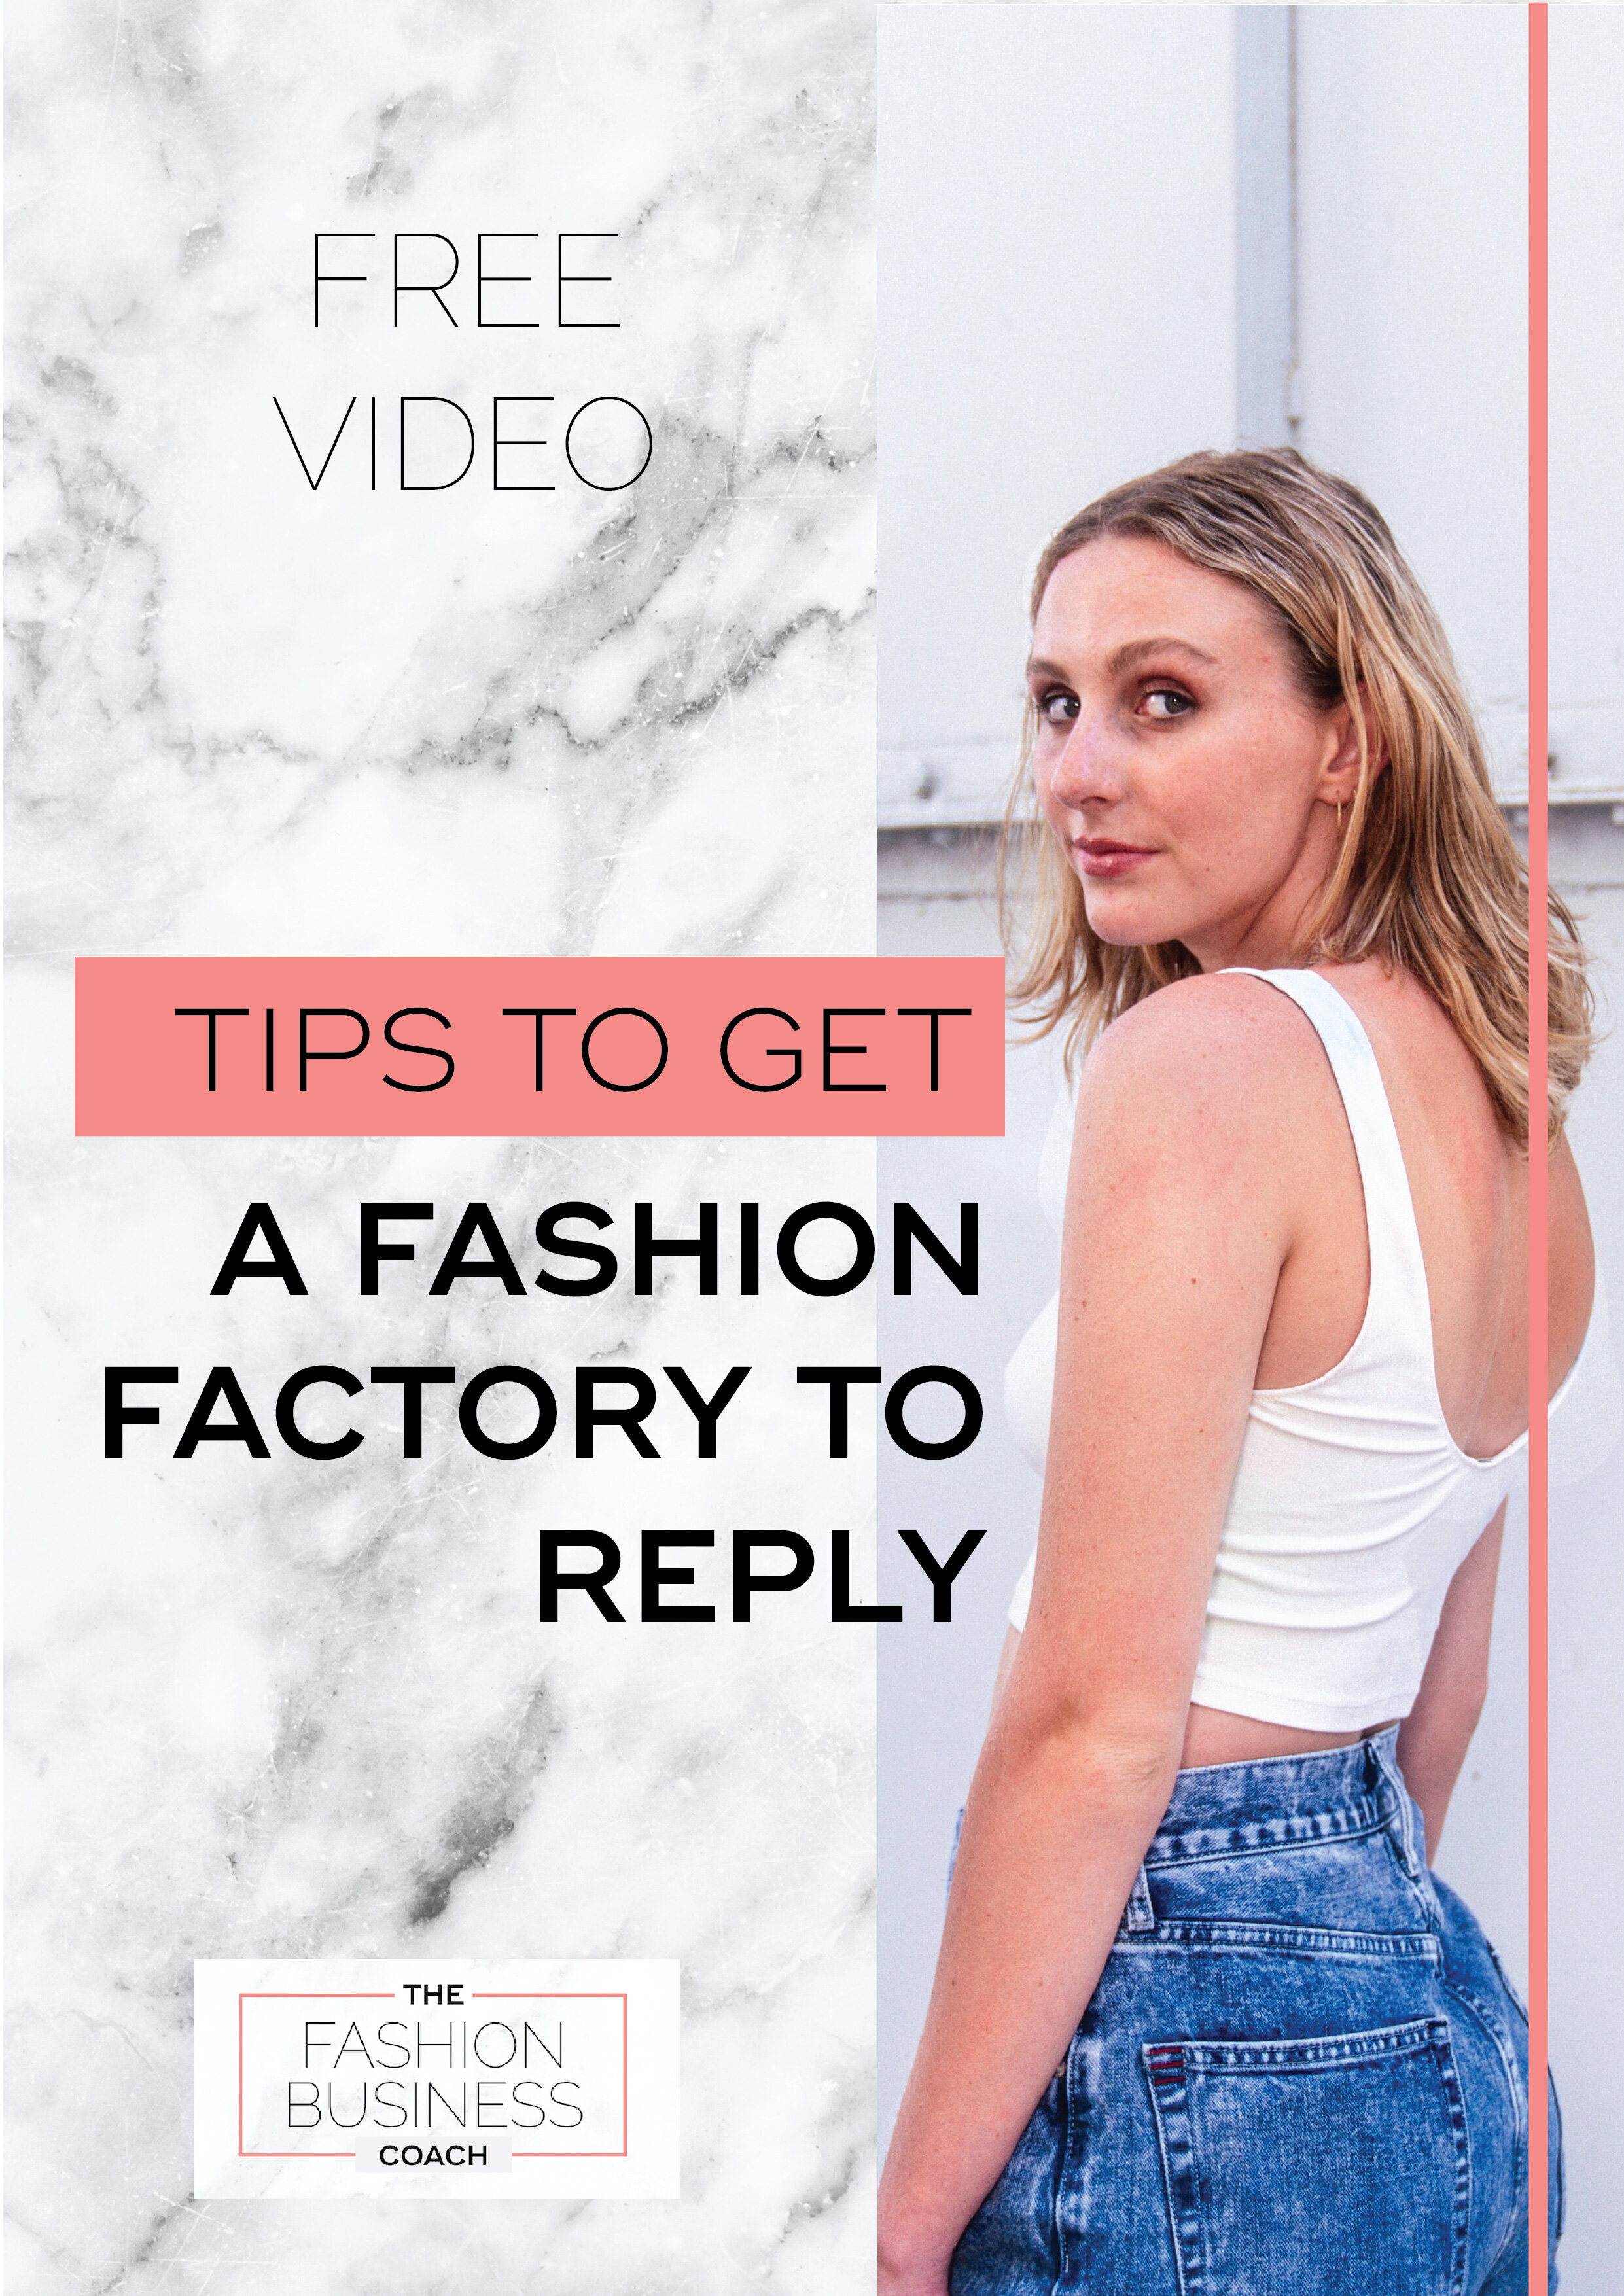 Tips to Get a Fashion Factory to Reply Video.jpg